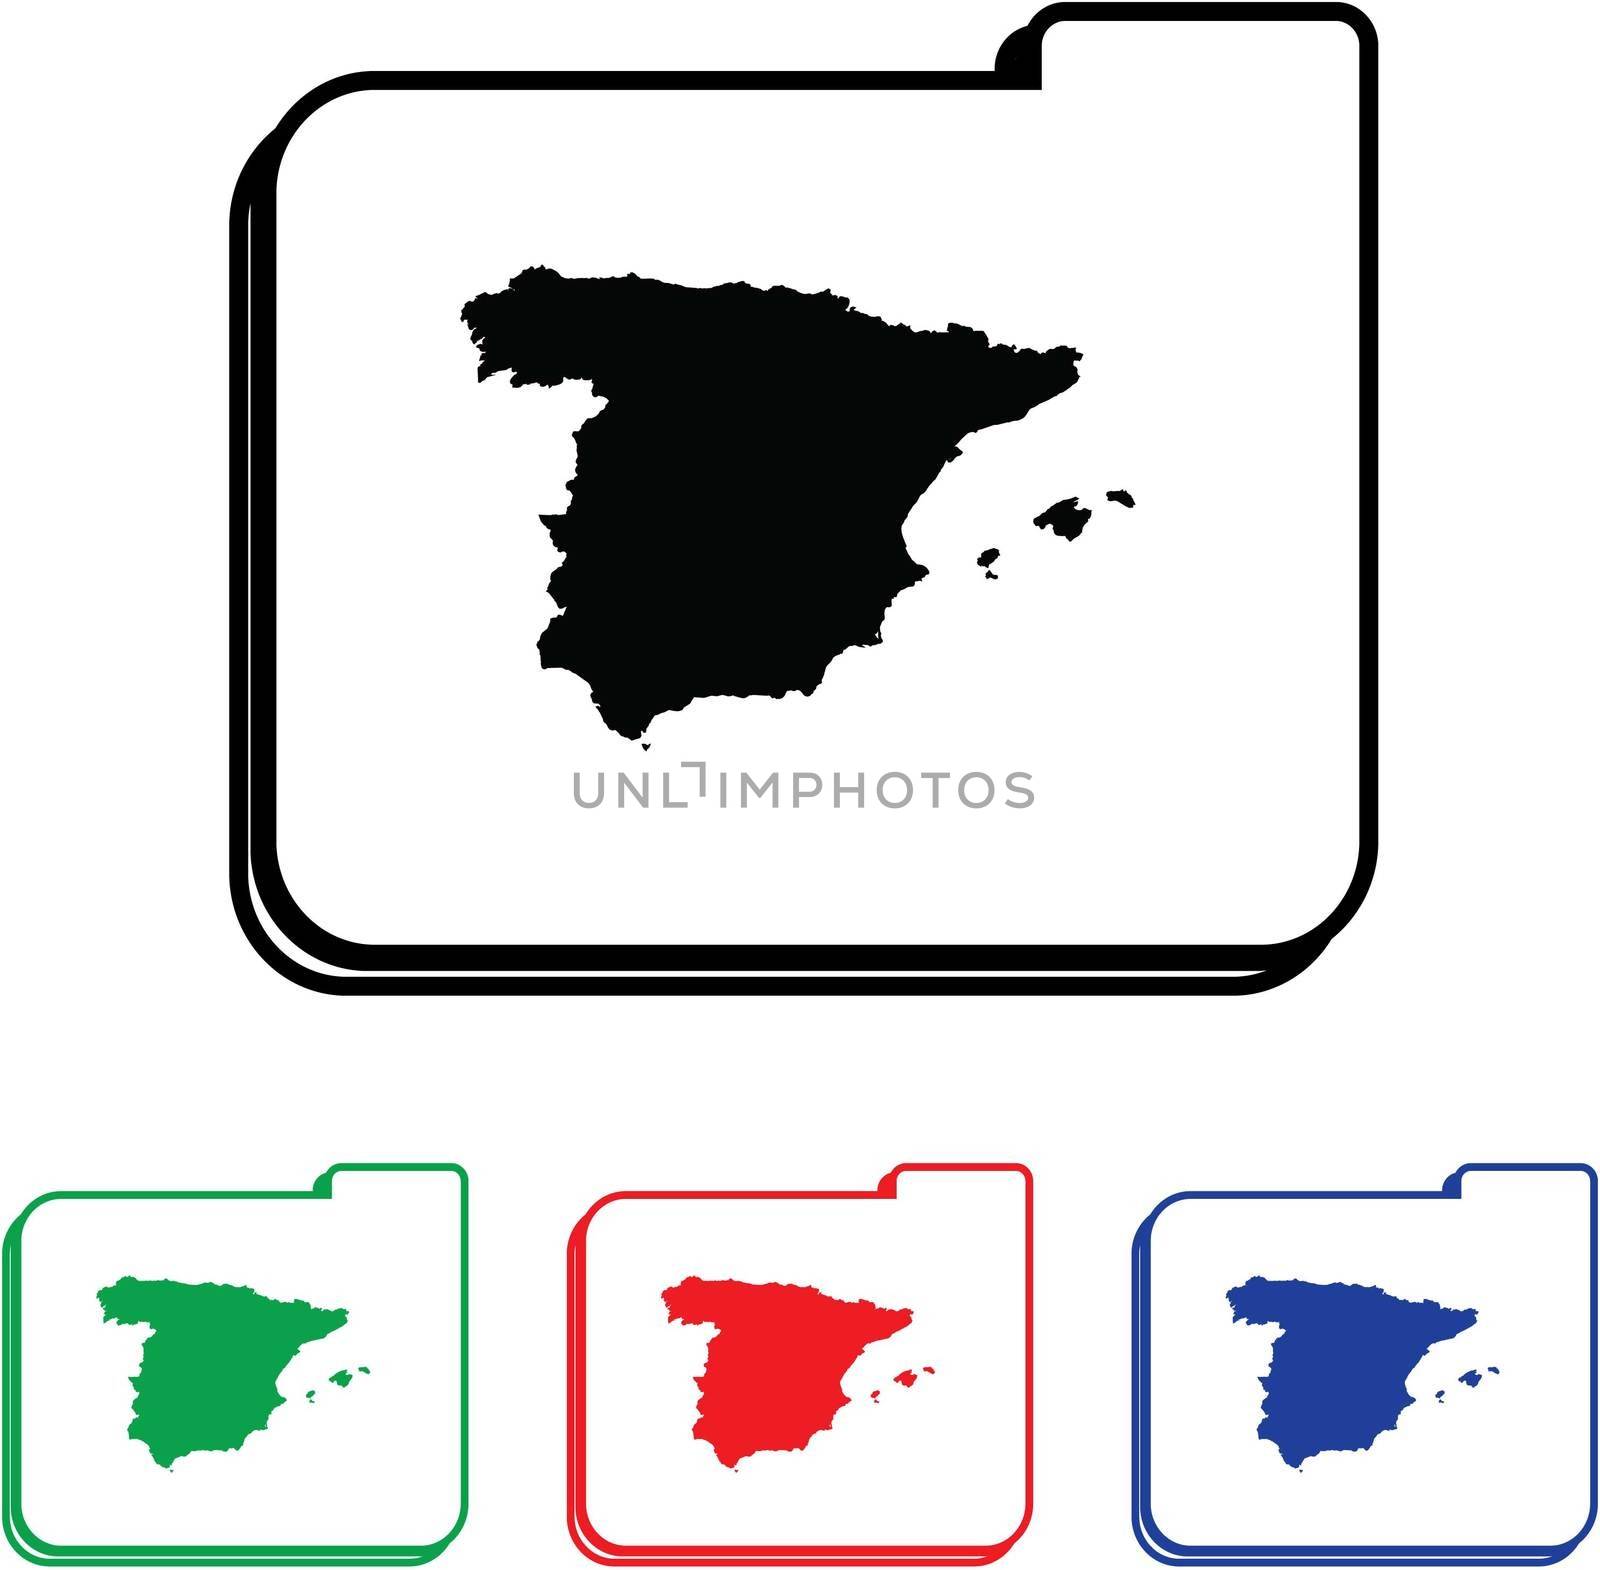 Spain Icon Illustration with Four Color Variations